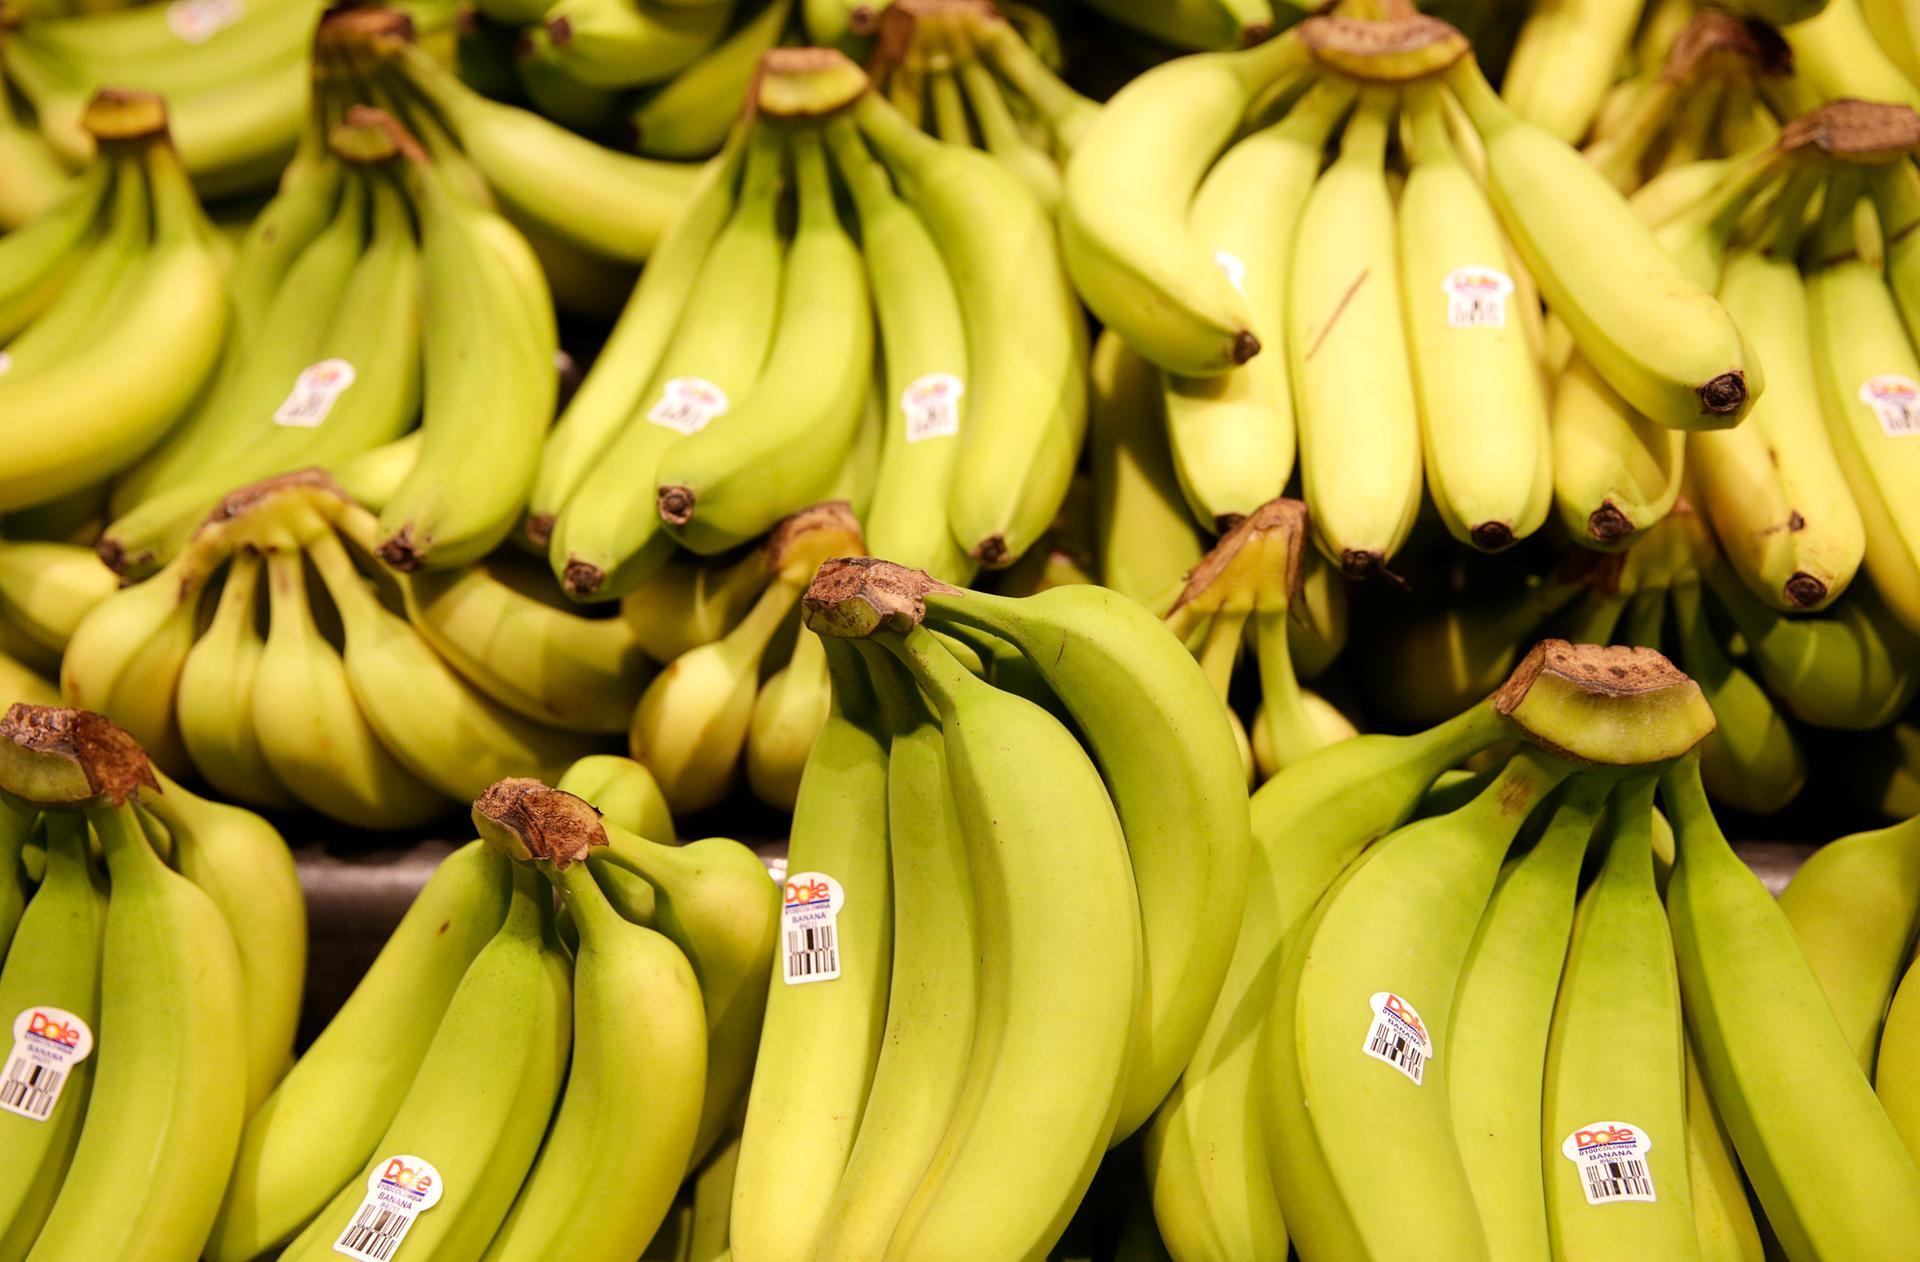 ​Dole brand bananas are seen on display at the Safeway store in Wheaton, Maryland February 13, 2015. 